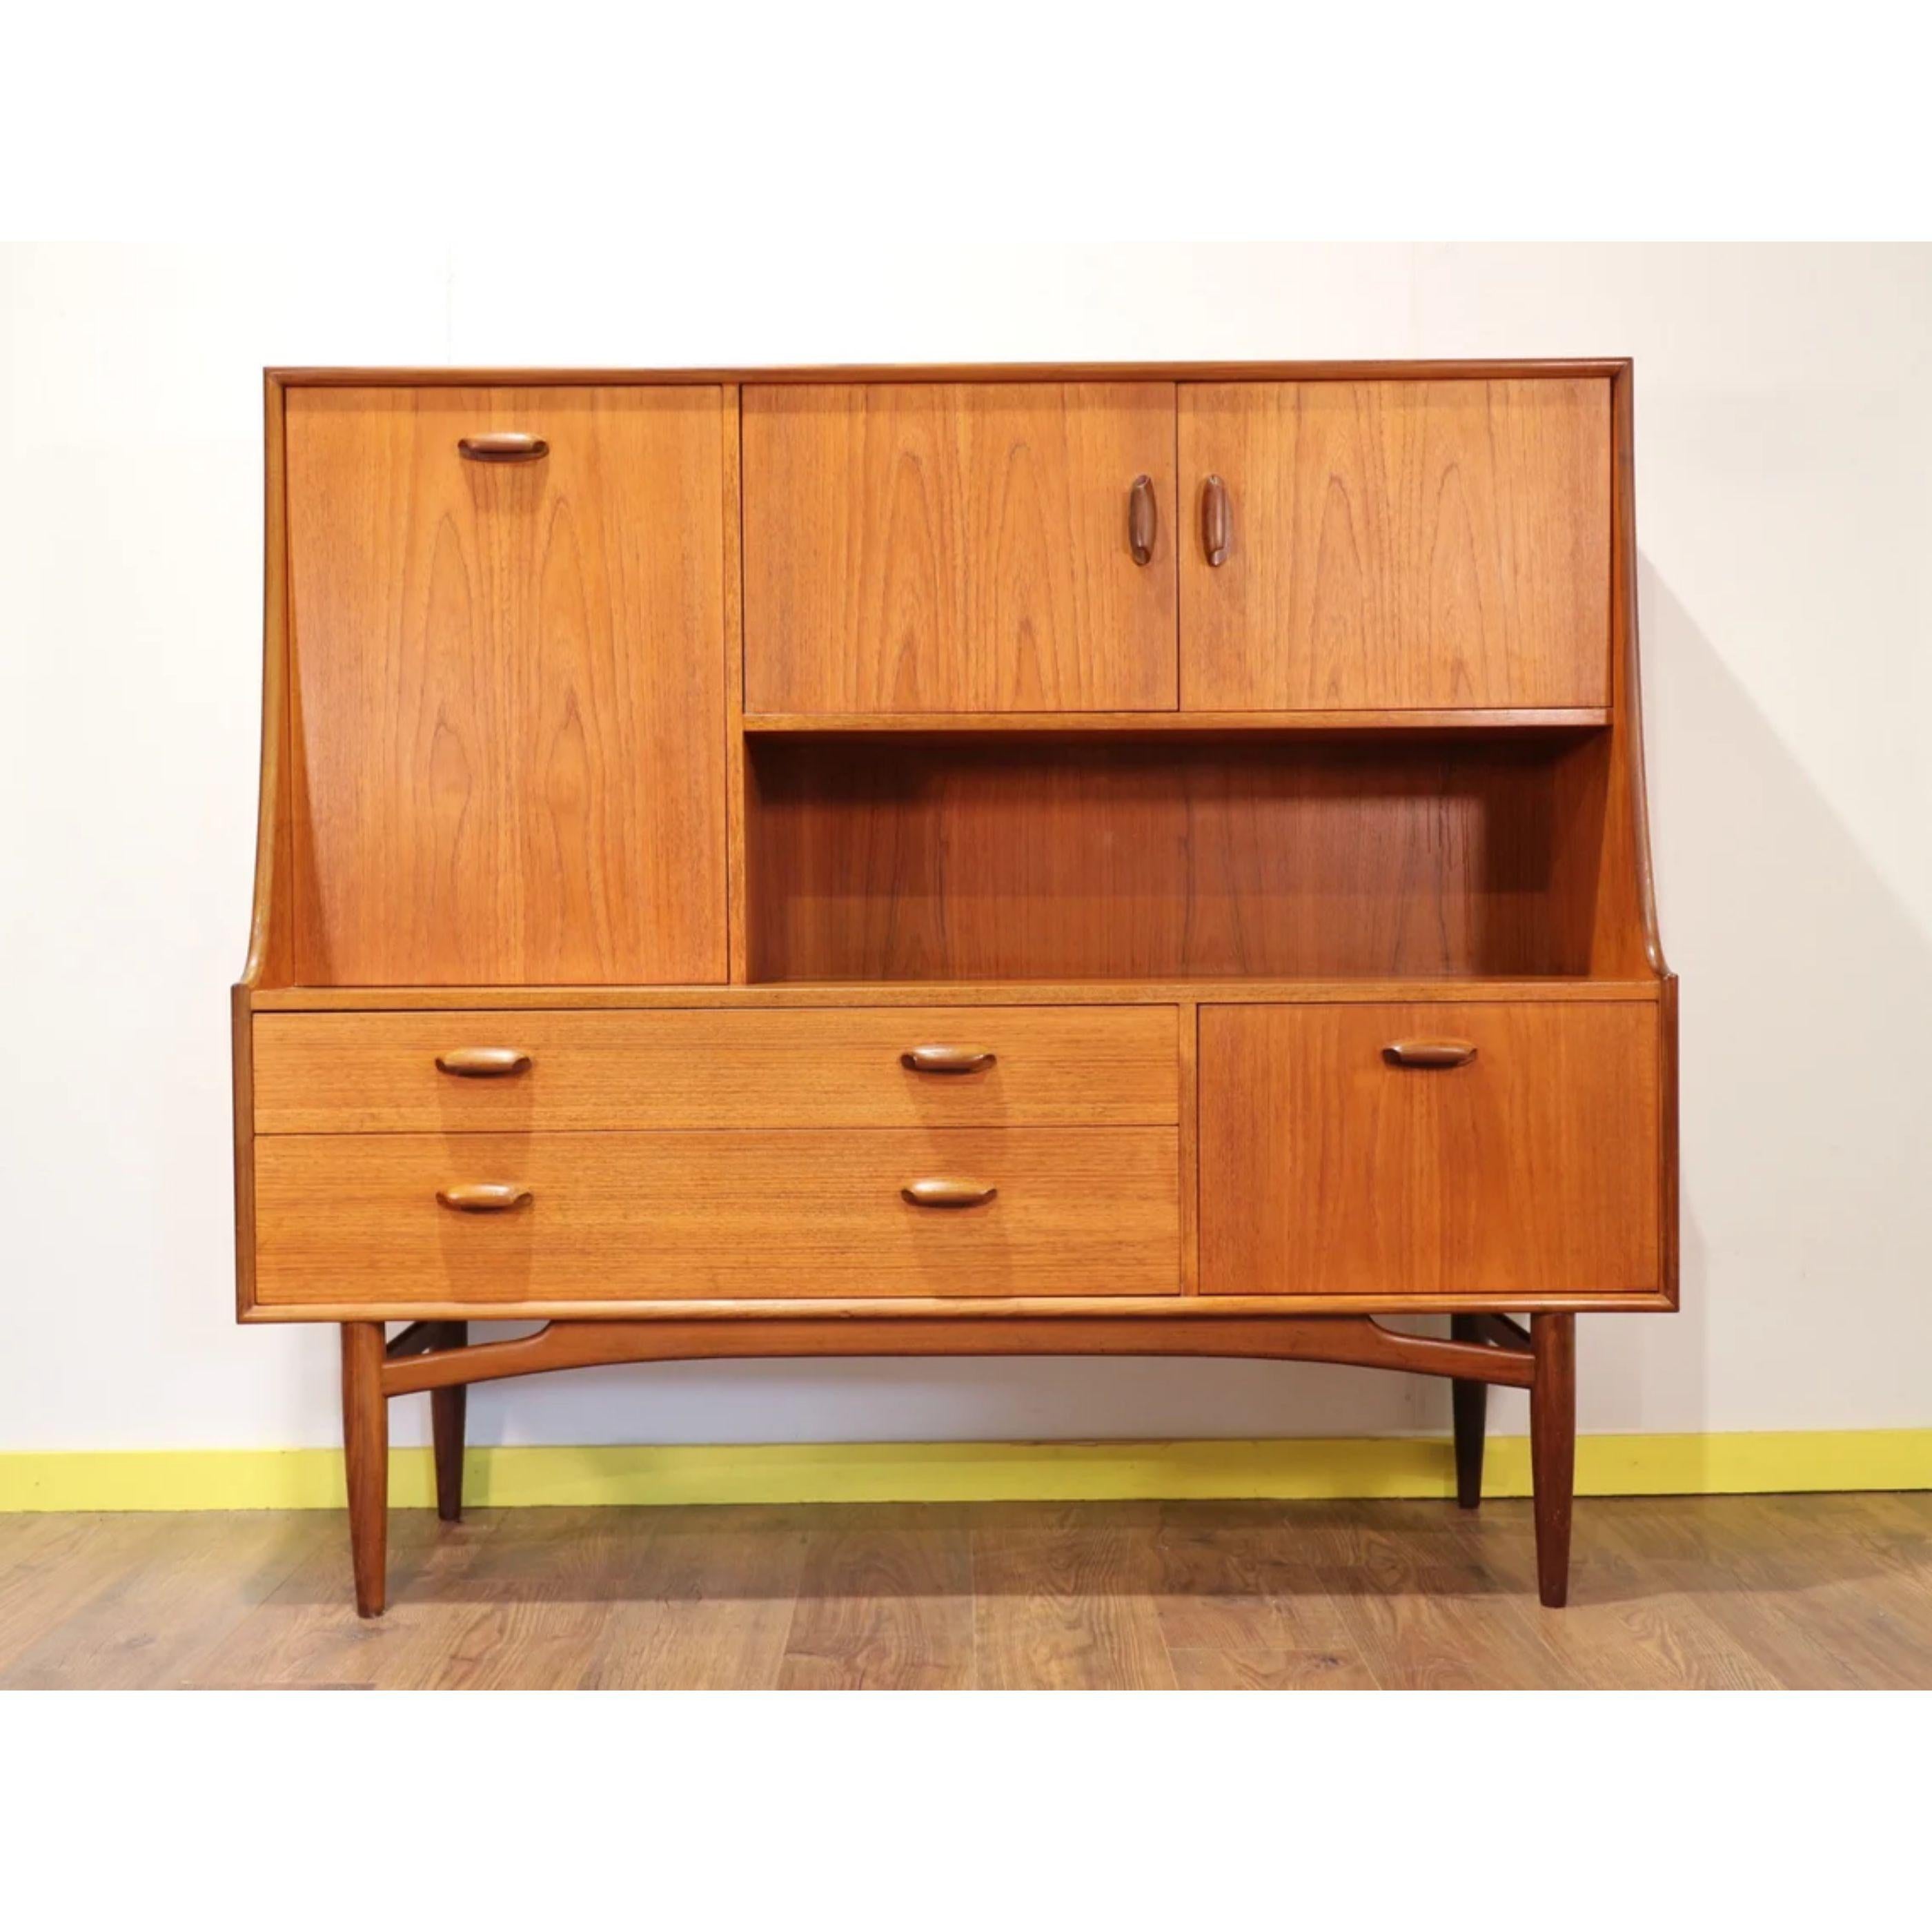 A wonderful Mid-century vintage teak G Plan sideboard highboard with cocktail cabinet, drawers and 2 spacious cupboards. Set on an elegant but sturdy solid teak leg frame which illustrates the quality of the design and craftsmanship of the piece.